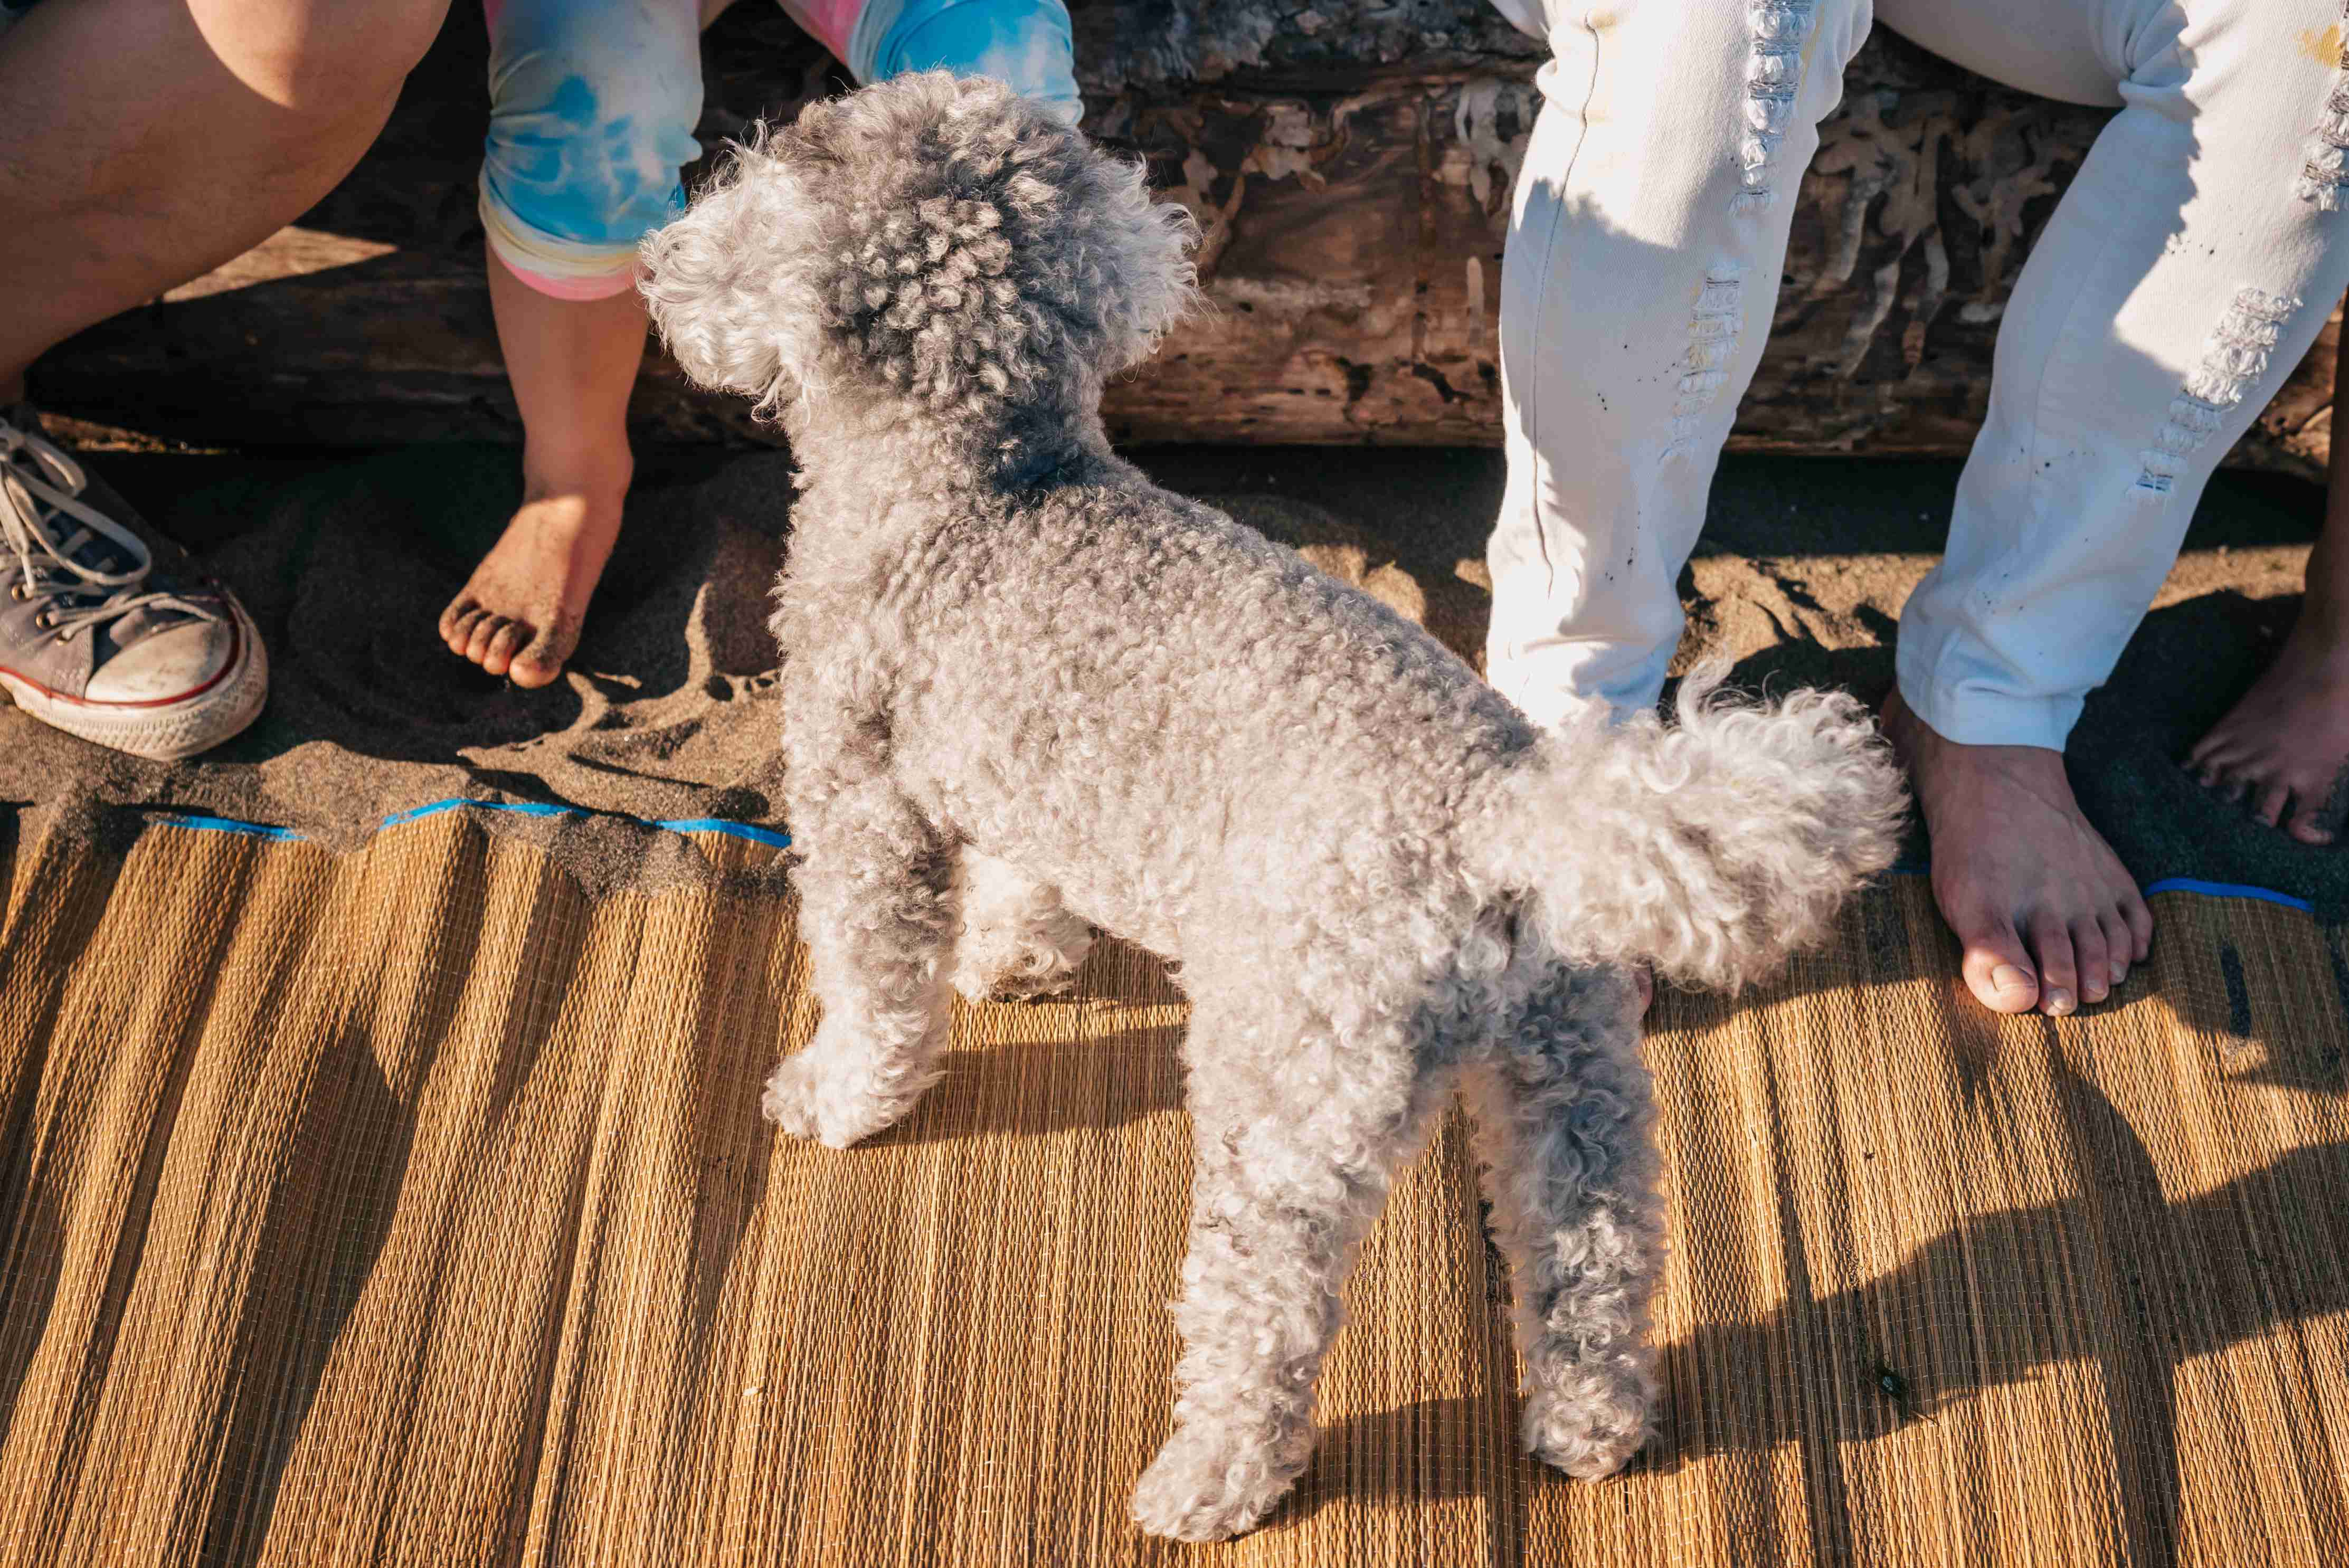 Did you encounter any difficulties with potty training your Poodle puppy?